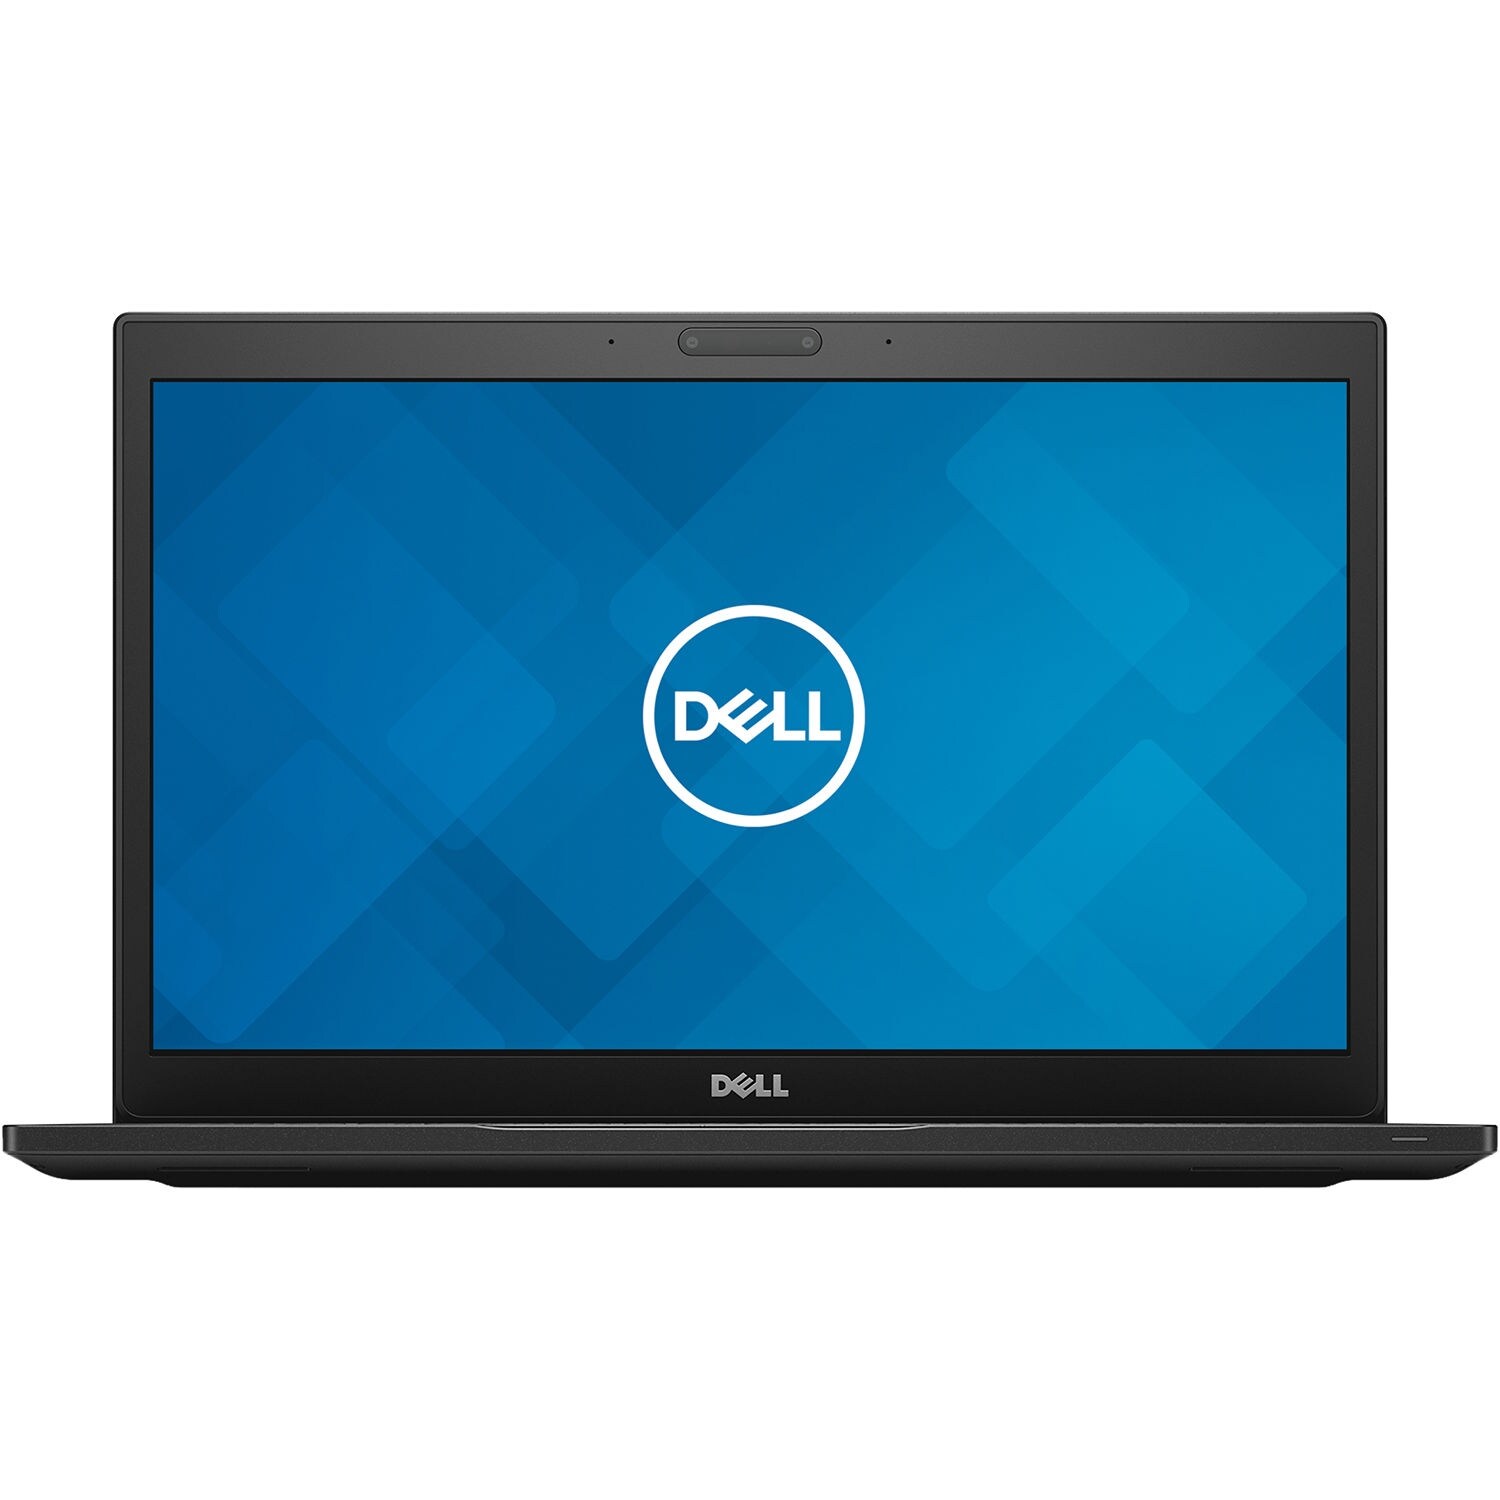 Shop Dell Latitude 7490 14 Notebook Dell Latitude 7490 Notebook Free Shipping Today Overstock